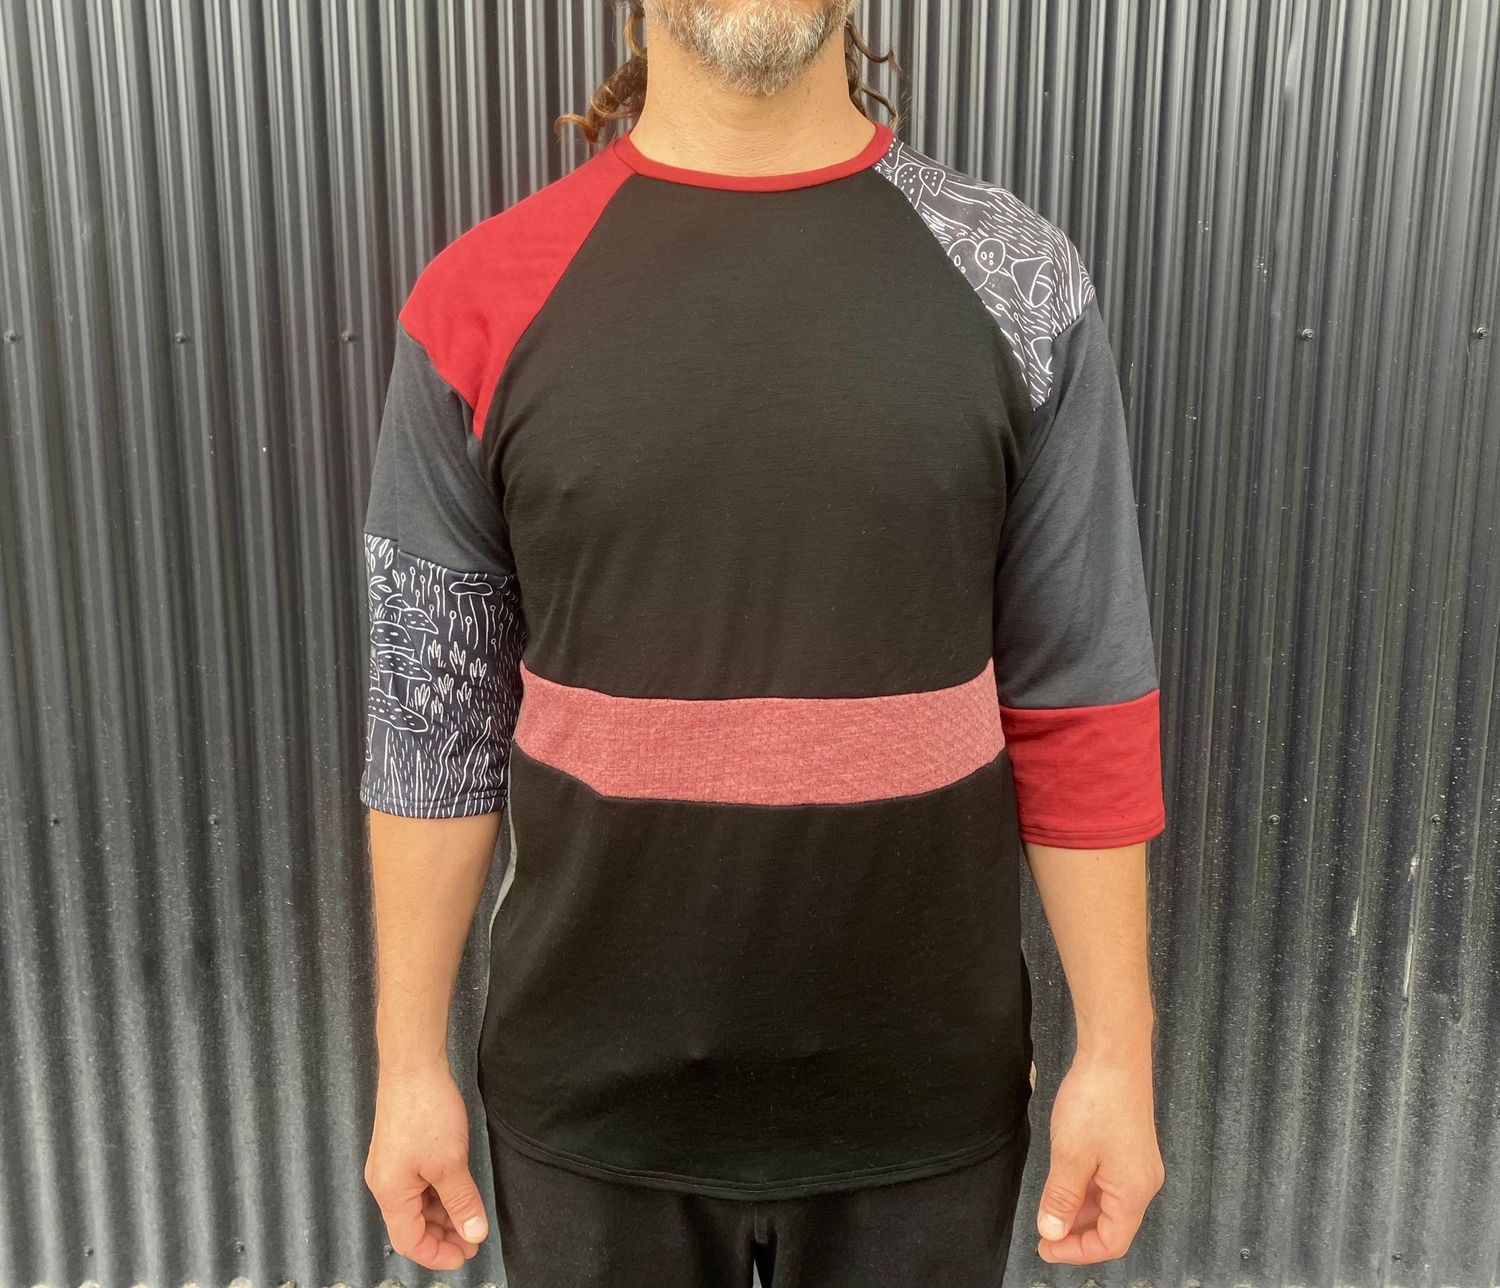 Men's Medium :: Up Cycled Plant Dyed Merino 3/4 Sleeve MTB Jersey :: One Of A Kind :: Light Weight + Air Vent Backing :: Made From Scraps